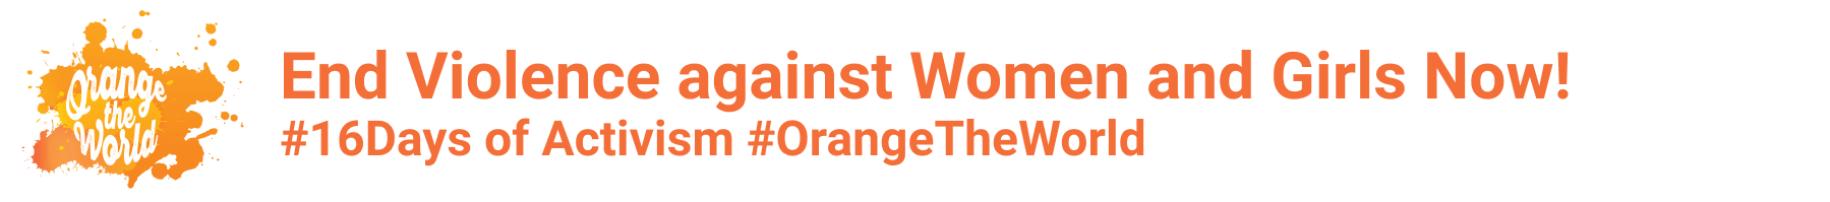 Orange the World logo, which is a splatter of orange paint with the words "Orange the World" written in the splatter, is presented by text in orange.